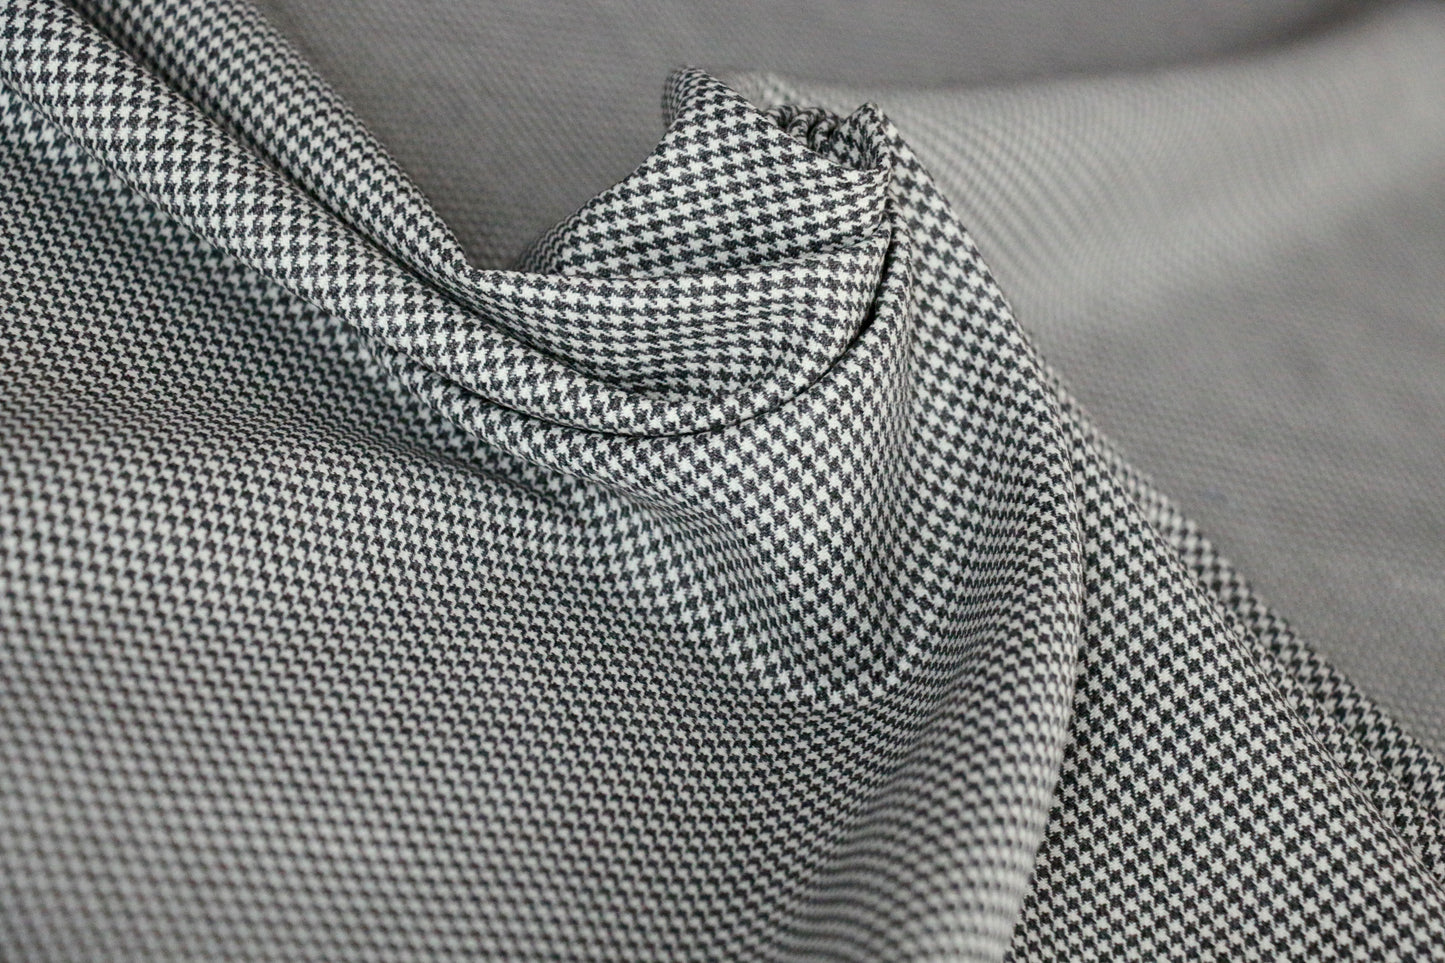 wool-blend-suiting-fabric-grey-and-off-white-houndstooth-design-clothcontrol